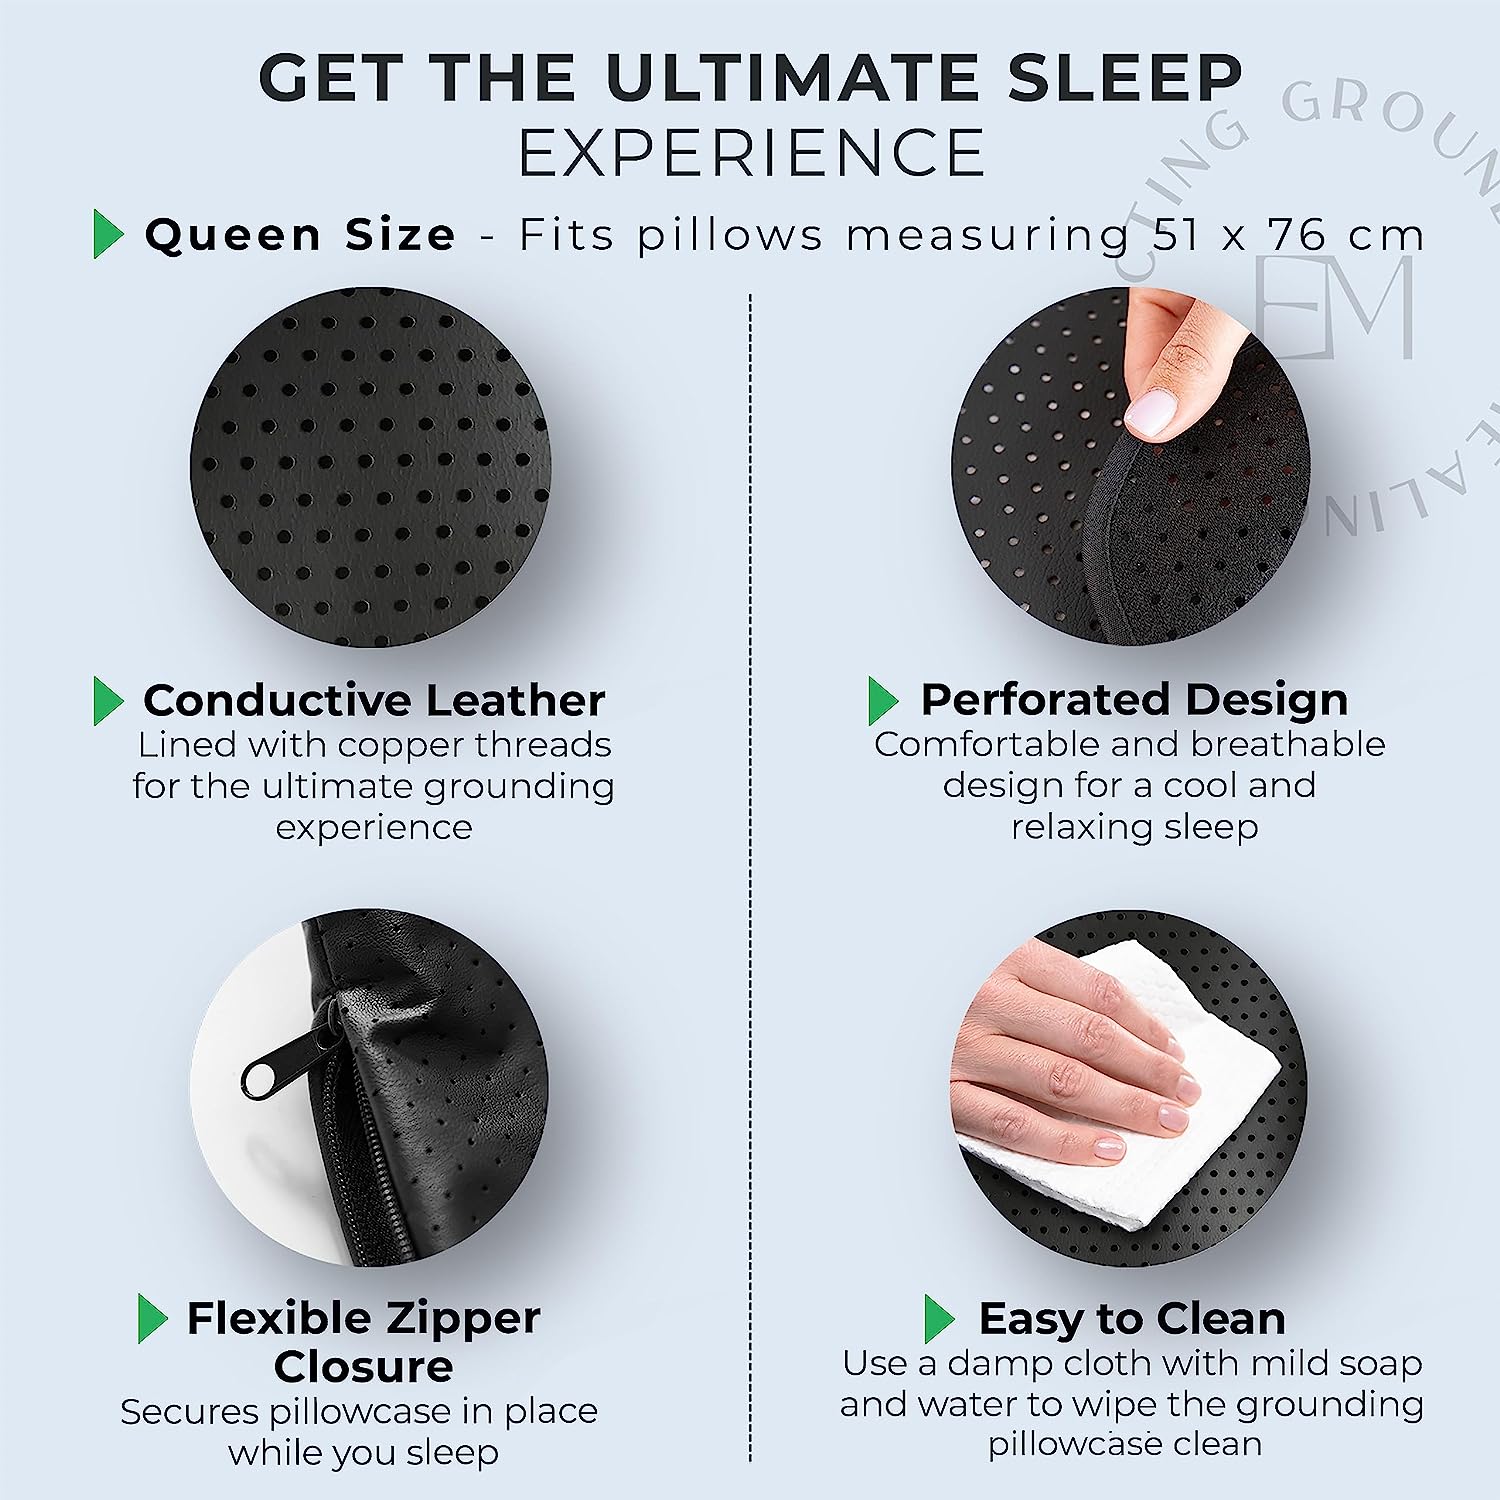 Why choose Earth and Moon's non- electrical earthing mat?